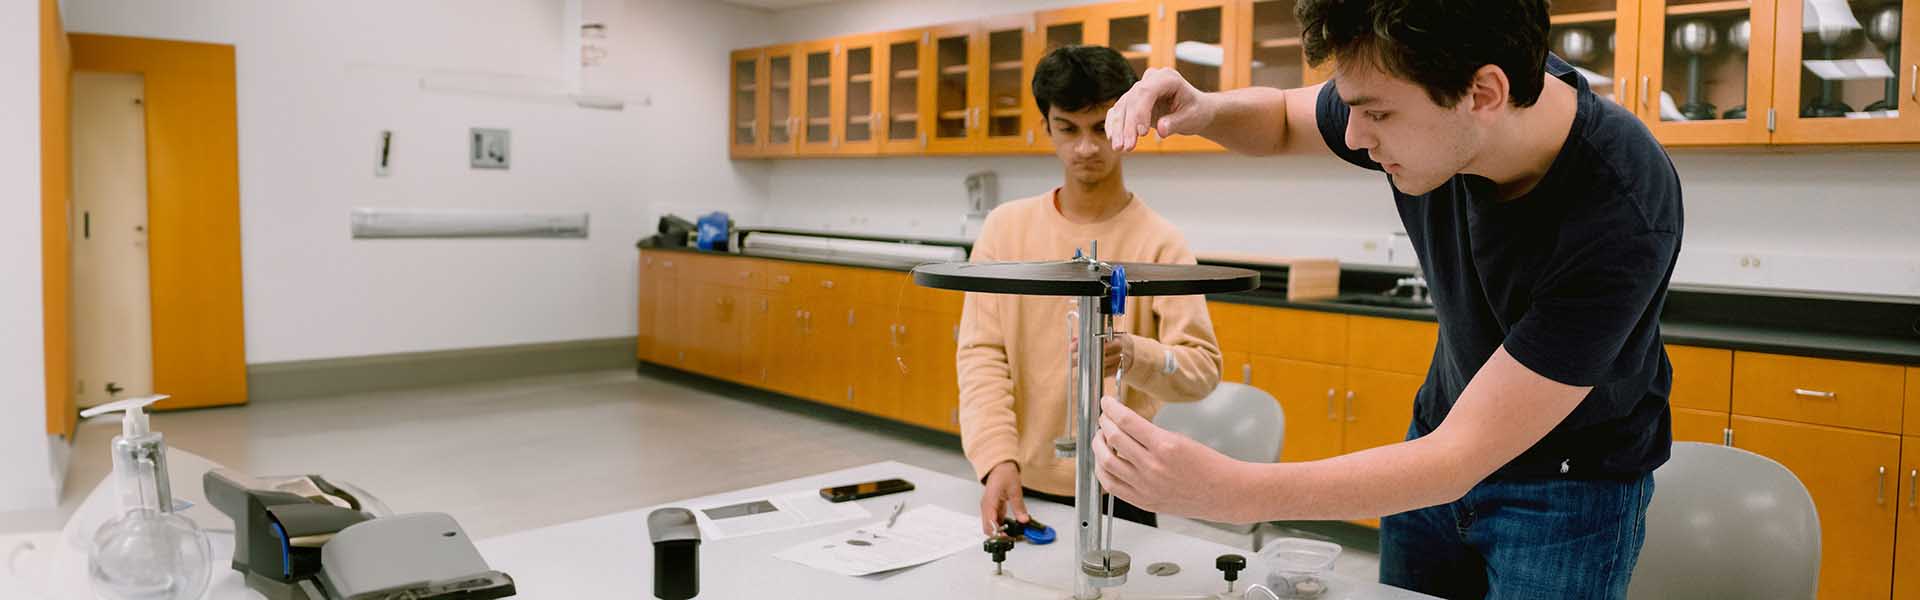 Students in a physics lab.